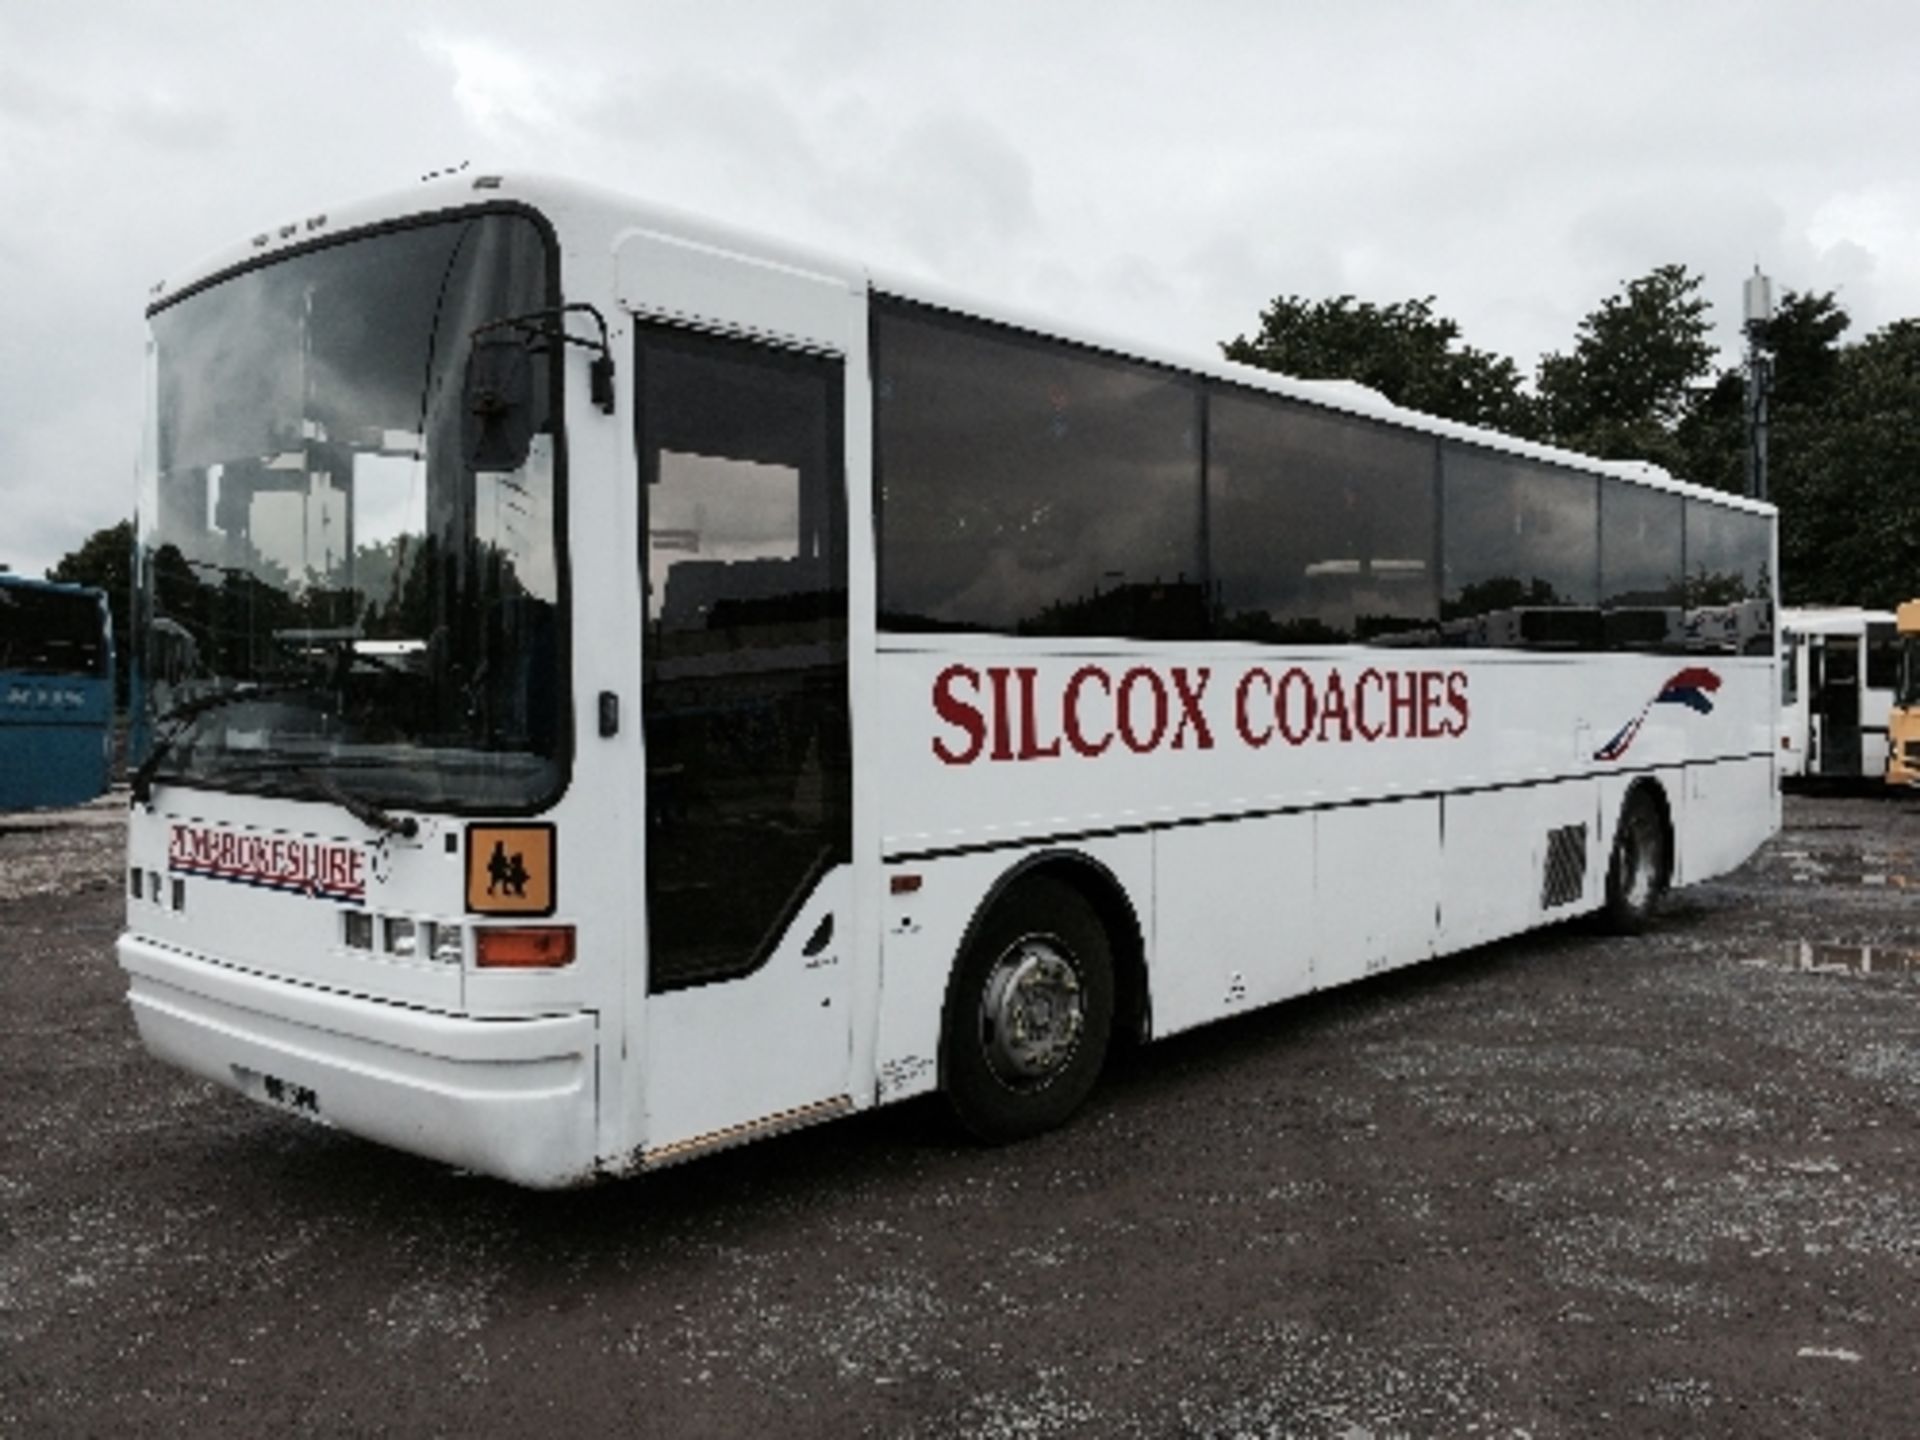 Dennis Javelin / UVG S320 Cutlass 70 seater capacity coach, 3 point seat belts, Registration No. M18 - Image 2 of 6